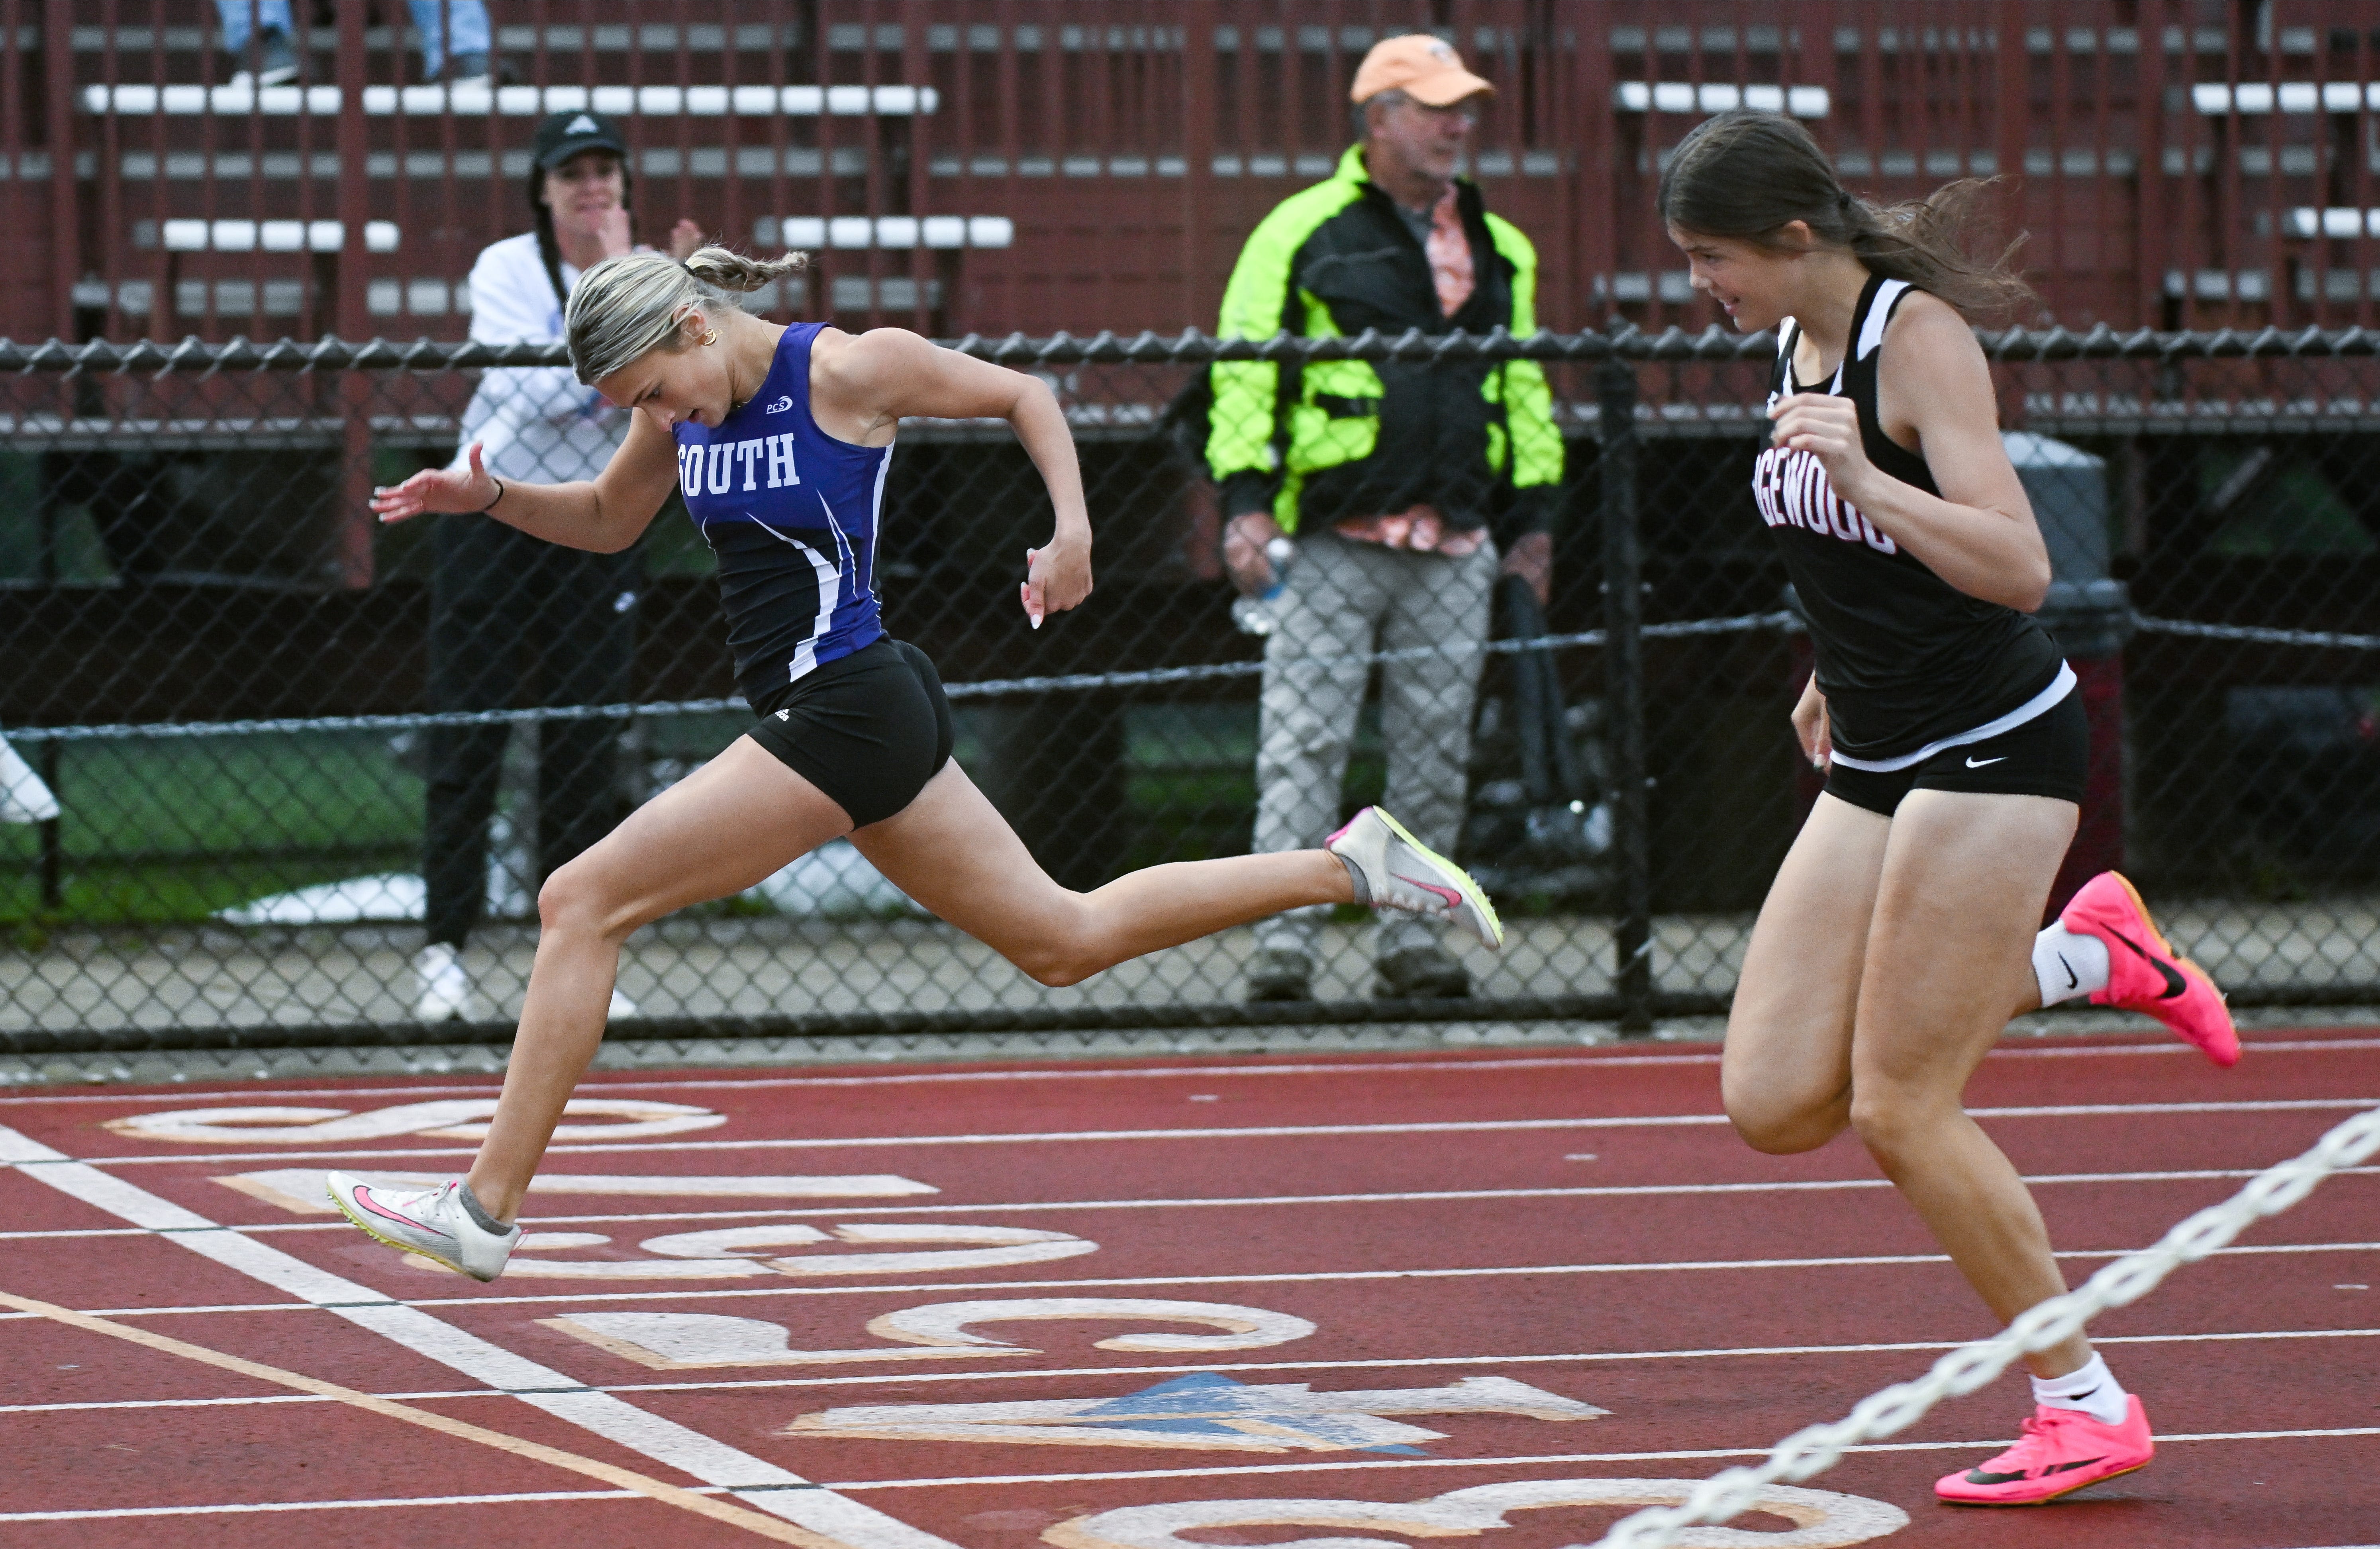 IHSAA girls state track: South's Eden Bailey makes most of sprint to the finish